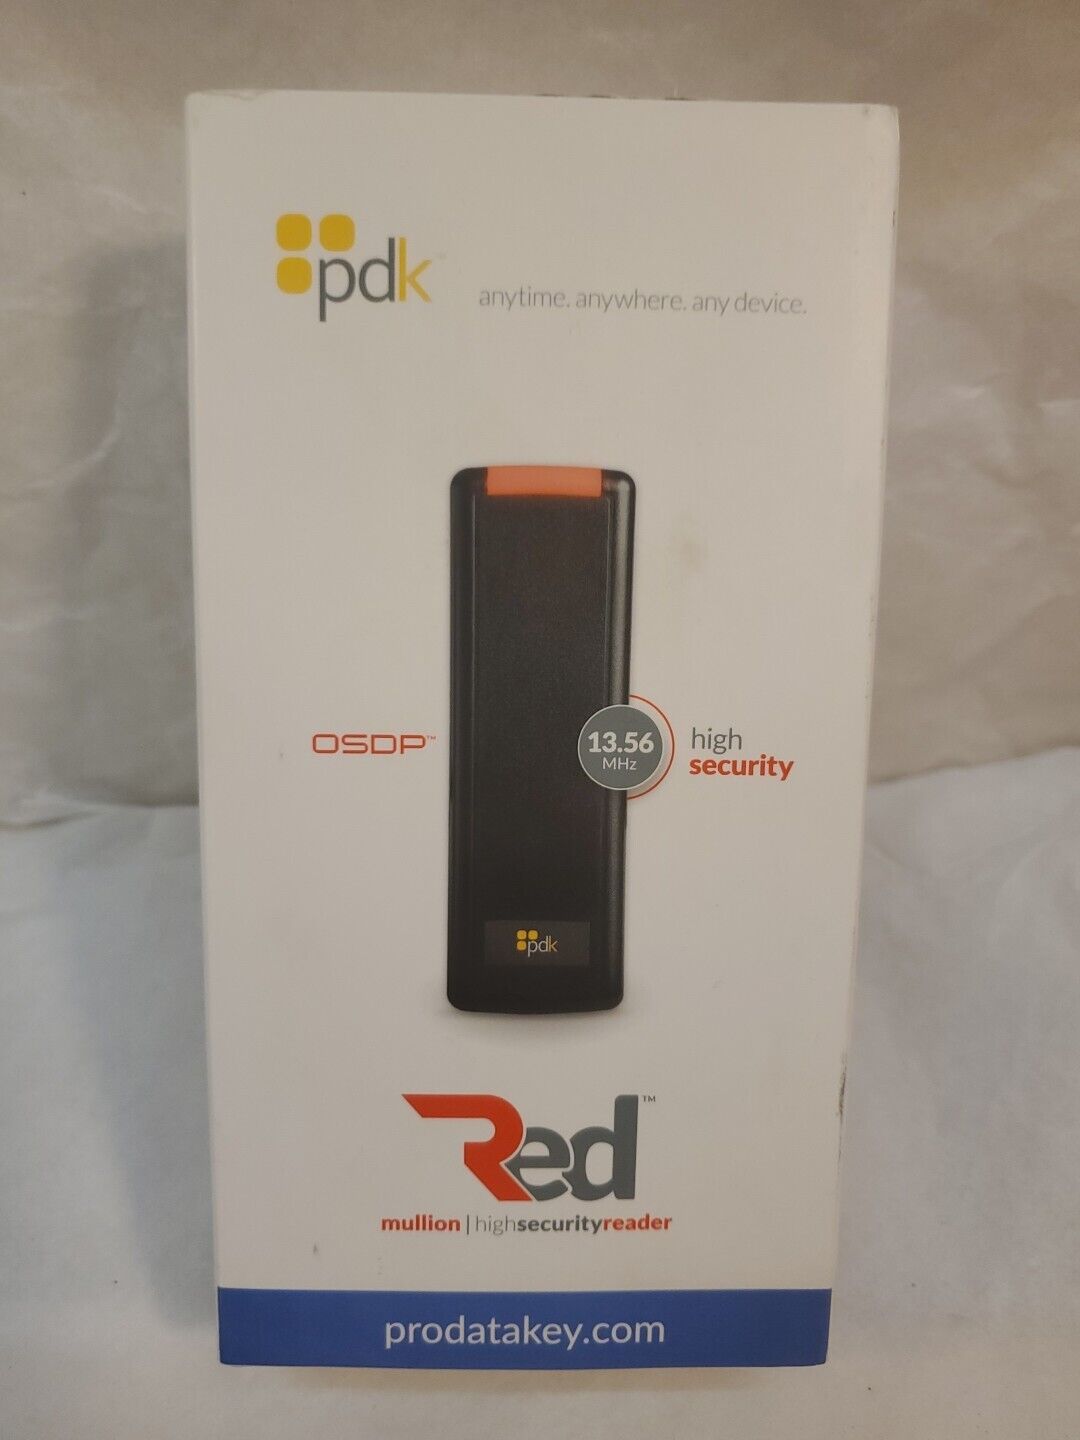 PDK Prodatakey RGBP Red Bluetooth Mobile Credential Proximity Reader 125KHz